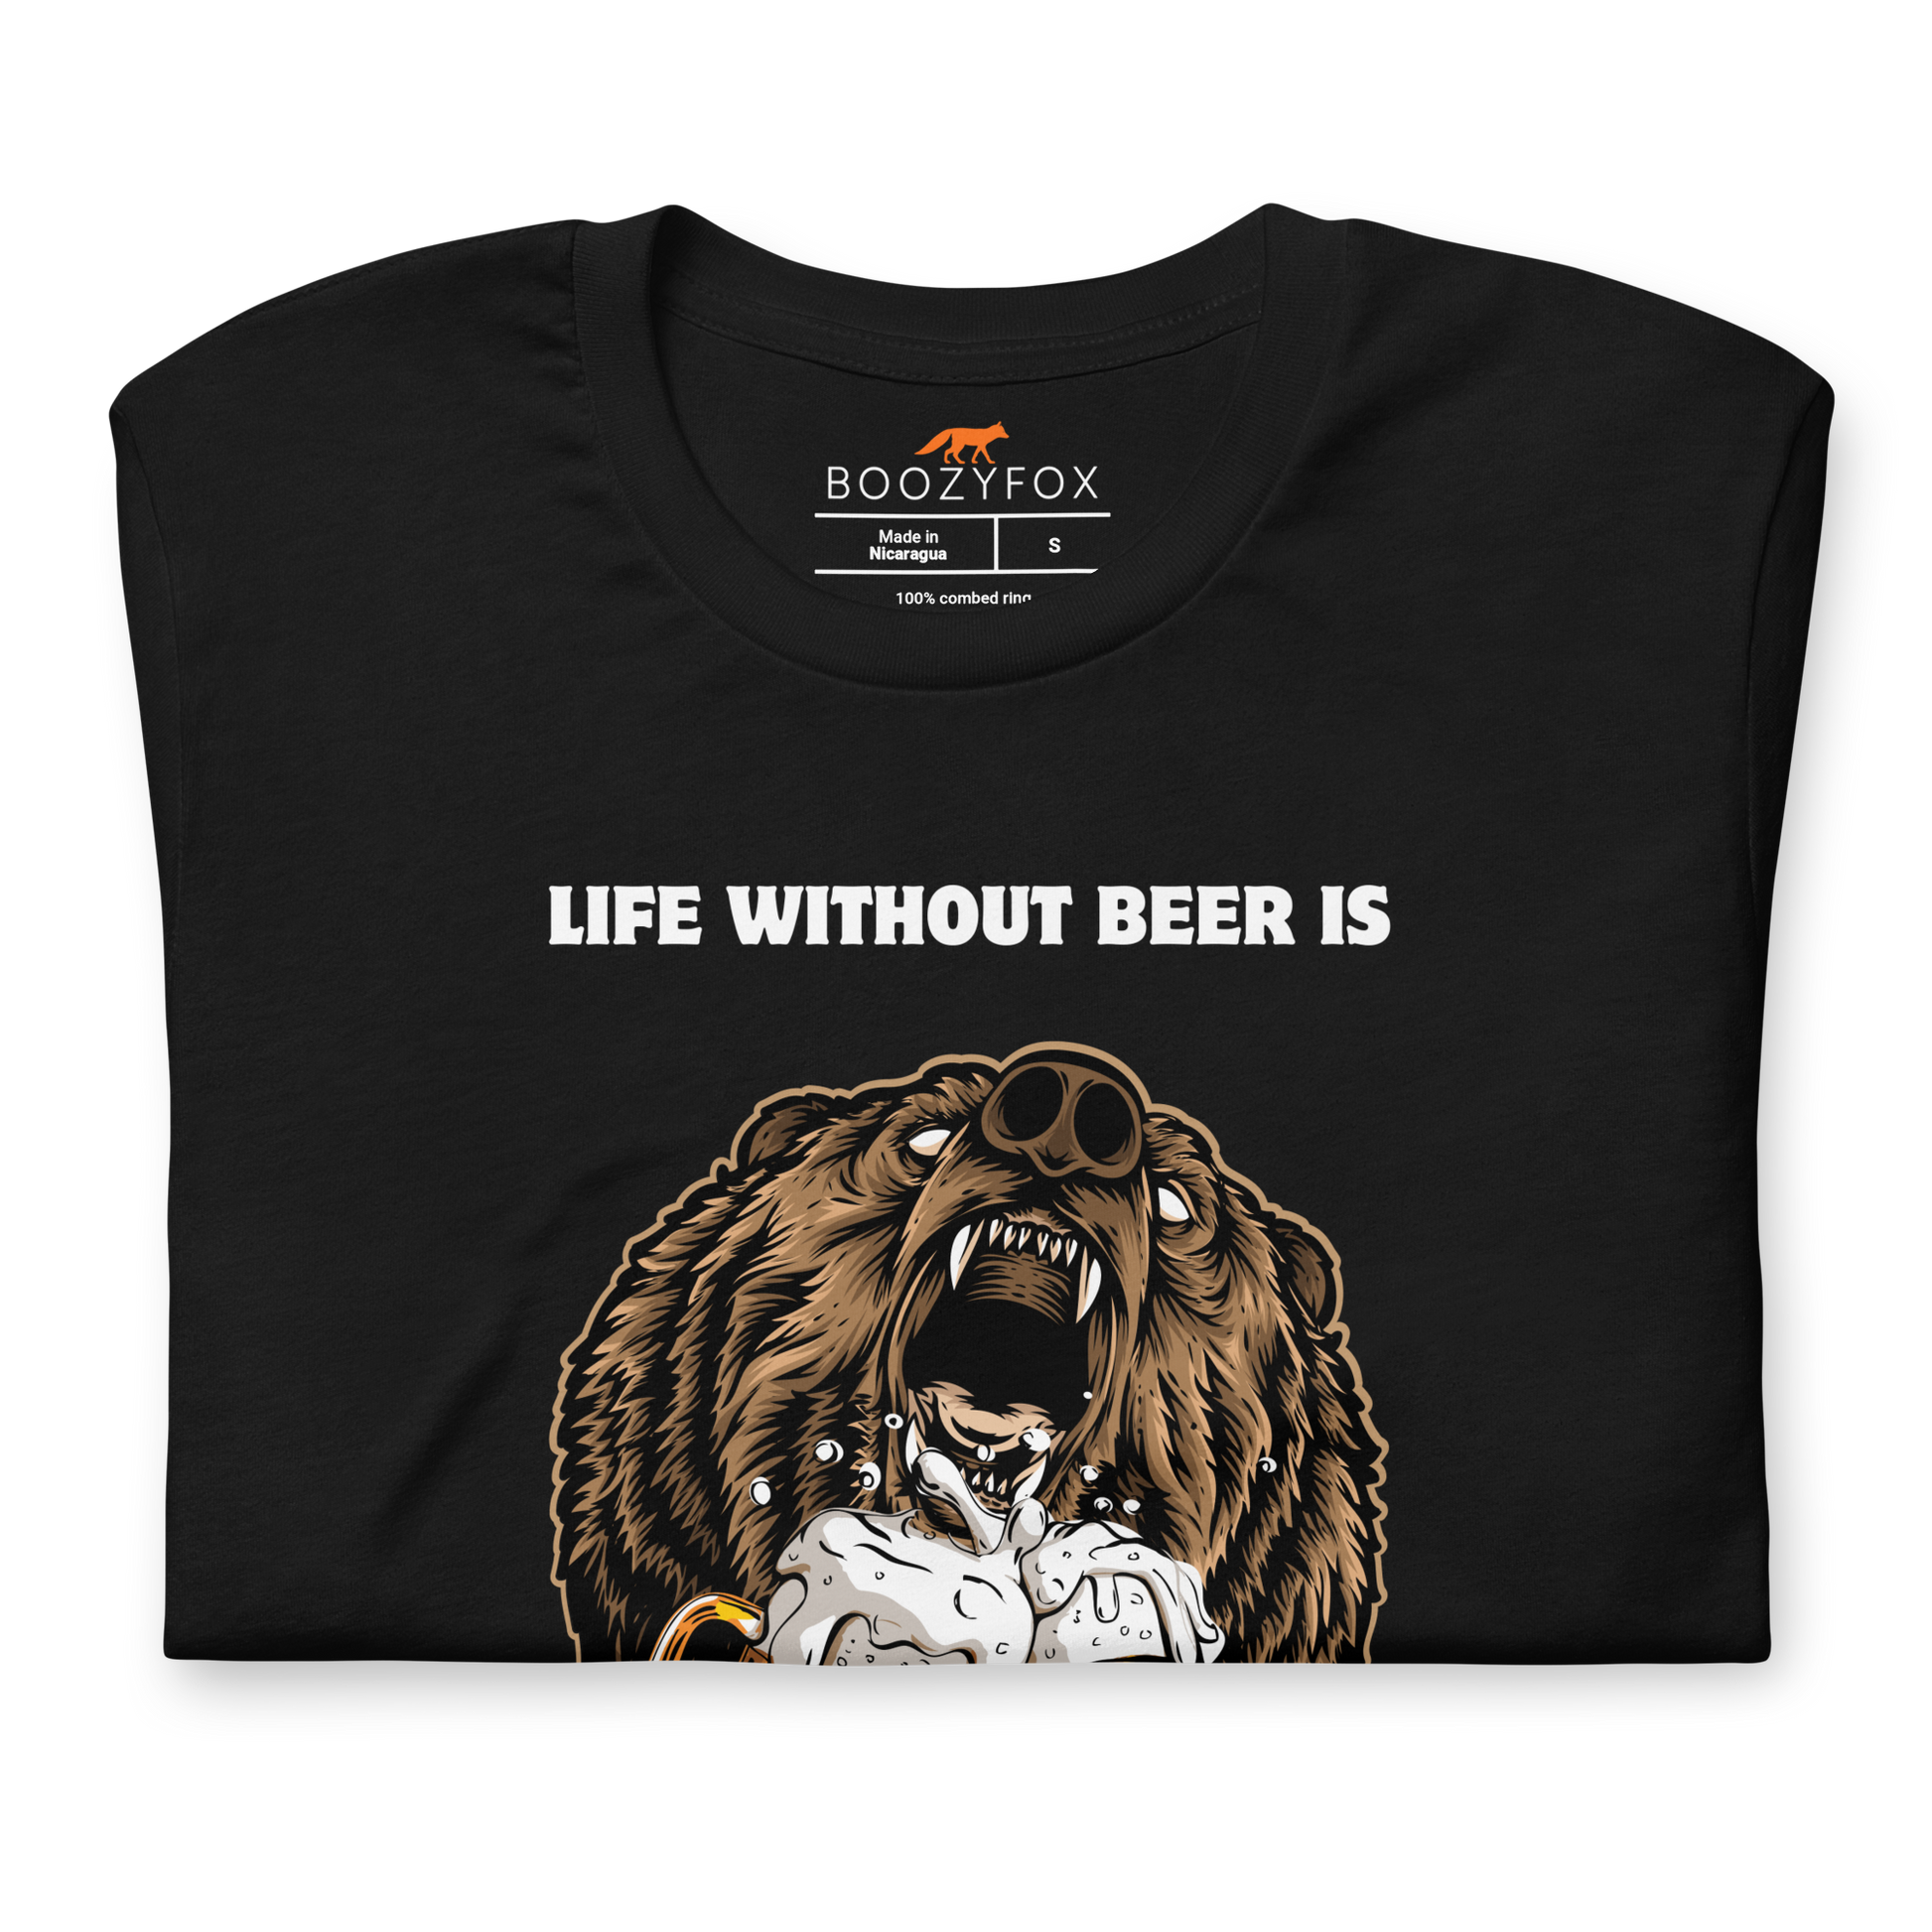 Front details of a Black Premium Bear Tee featuring a Life Without Beer Is Unbeerable graphic design on the chest - Funny Graphic Bear Tees - Boozy Fox